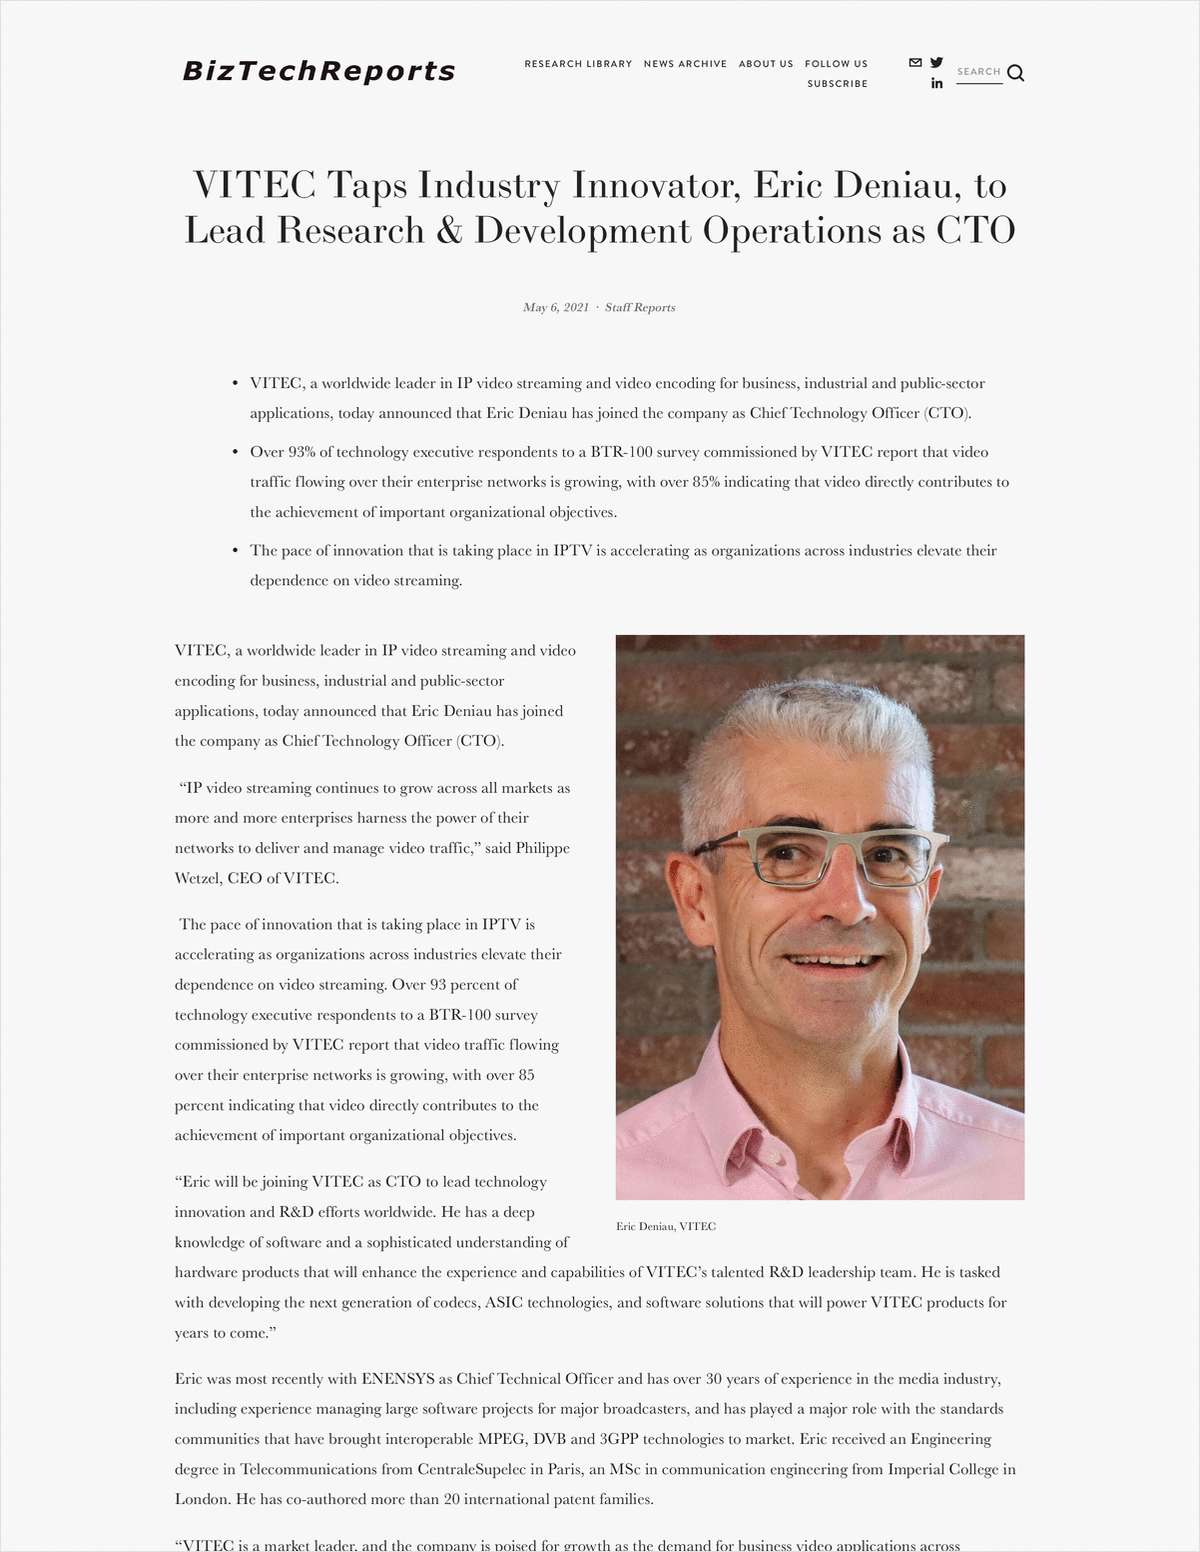 VITEC Taps Industry Innovator, Eric Deniau, to Lead Research & Development Operations as CTO